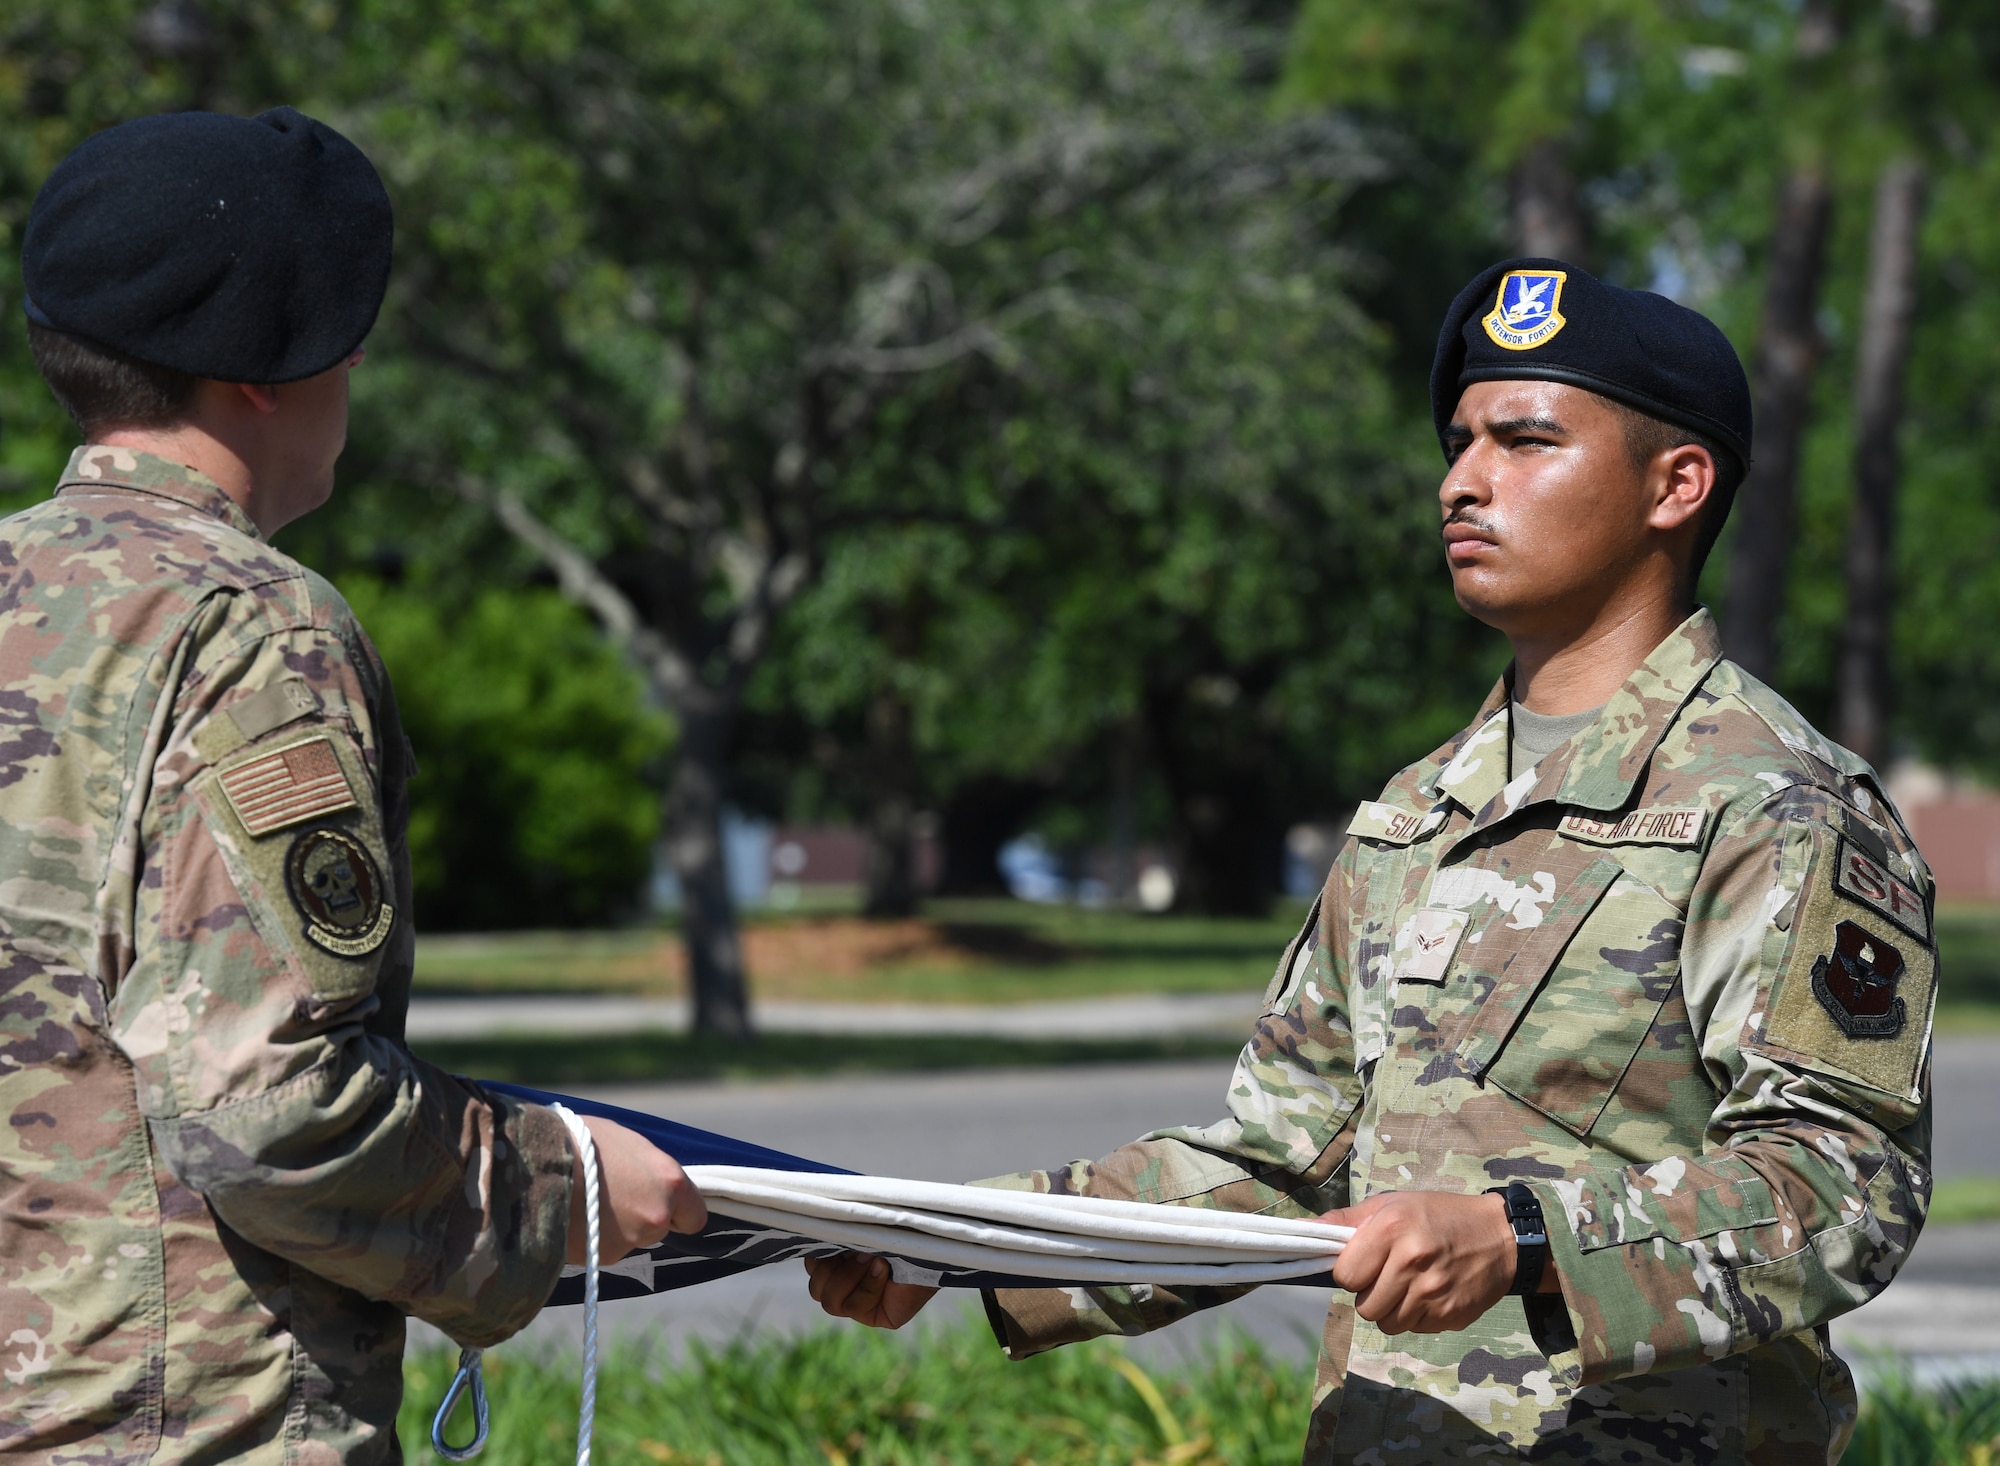 U.S. Air Force Staff Sgt. Jacob Jettmar, 81st Security Forces Squadron base defense operations center controller, and Airman 1st Class Angel Silva, 81st SFS entry controller, participate in a retreat ceremony at Keesler Air Force Base, Mississippi, May 20, 2022. The ceremony, hosted by the 81st SFS, was the last of several events held in celebration of this year's Police Week. (U.S. Air Force photo by Kemberly Groue)